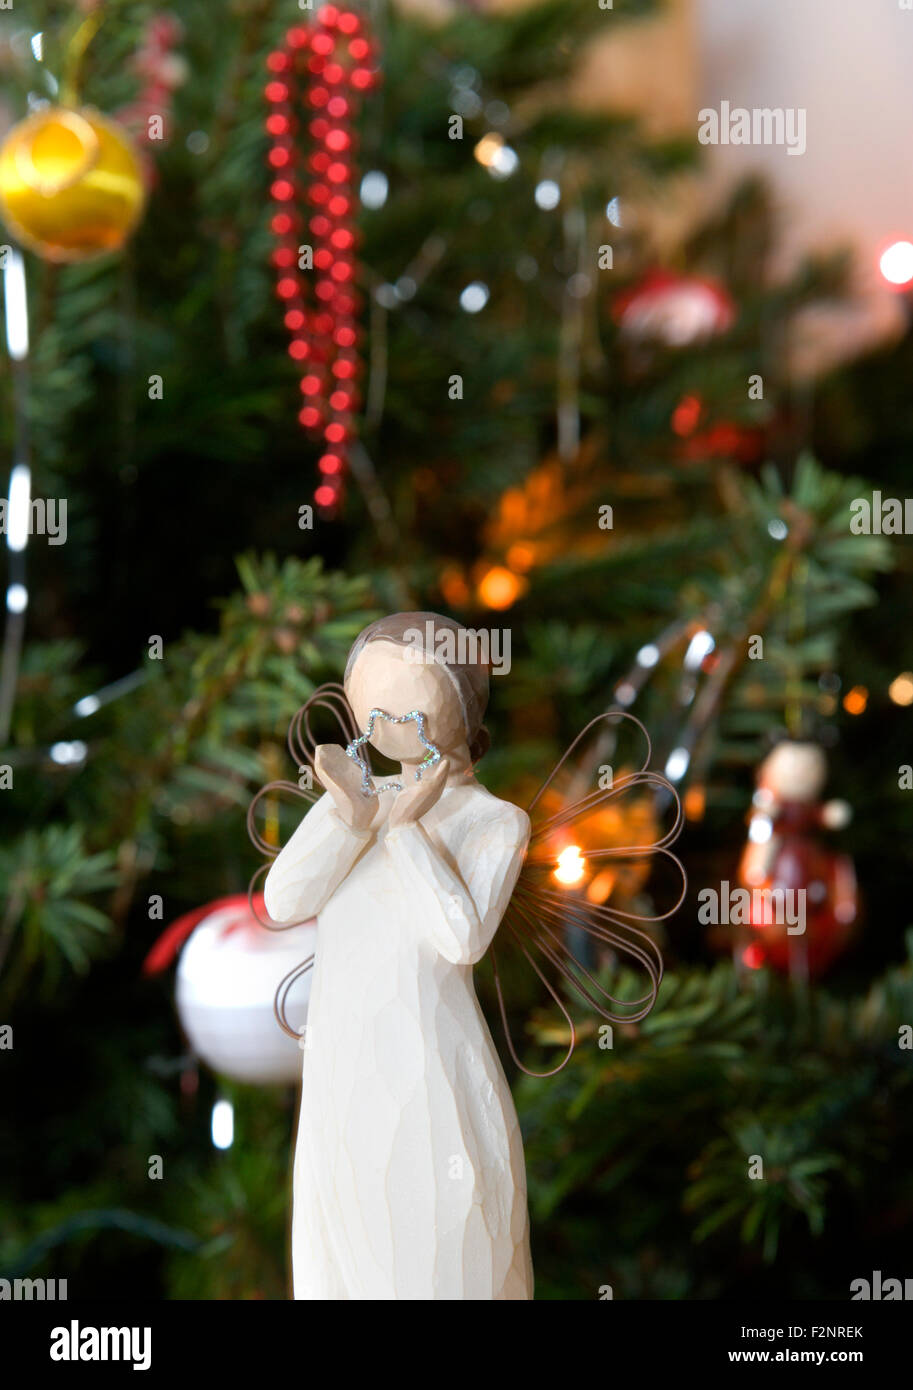 A festive image of an angel holding a star shape in front of a traditional real pine Christmas tree Stock Photo